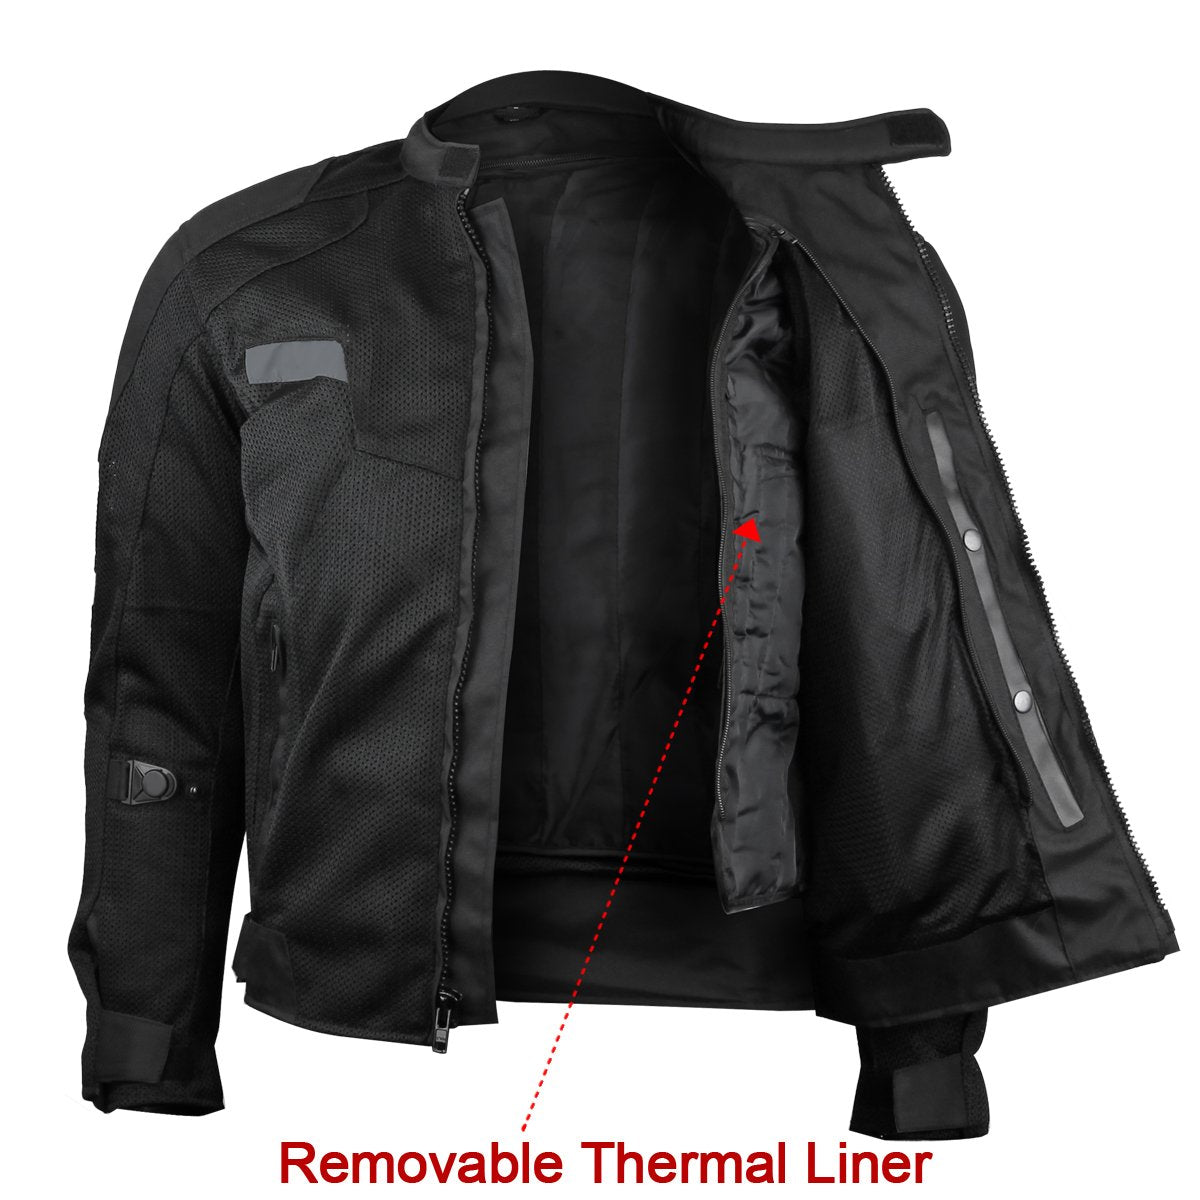 BLACK MESH MOTORCYCLE JACKET WITH INSULATED LINER AND CE ARMOR